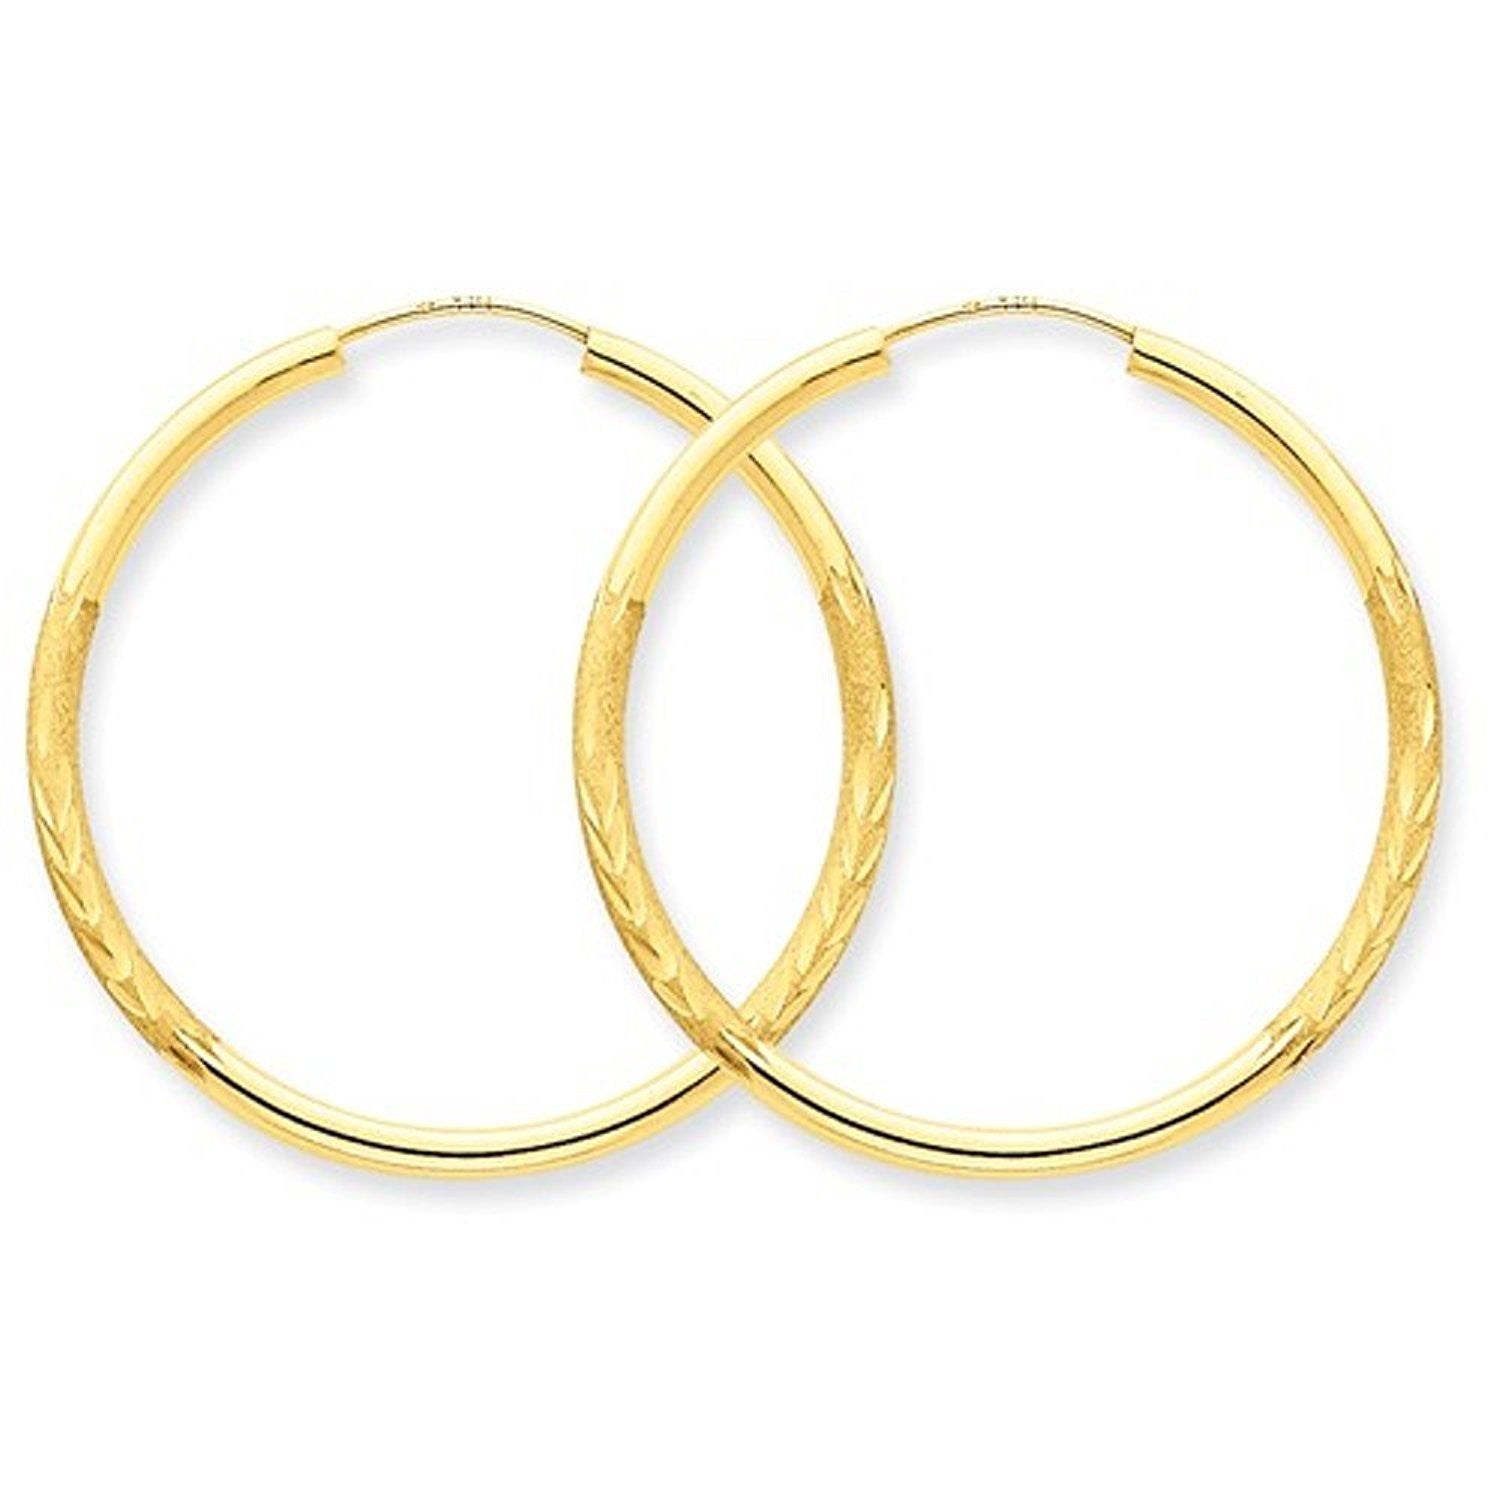 14K Yellow Gold 30mm Satin Textured Round Endless Hoop Earrings